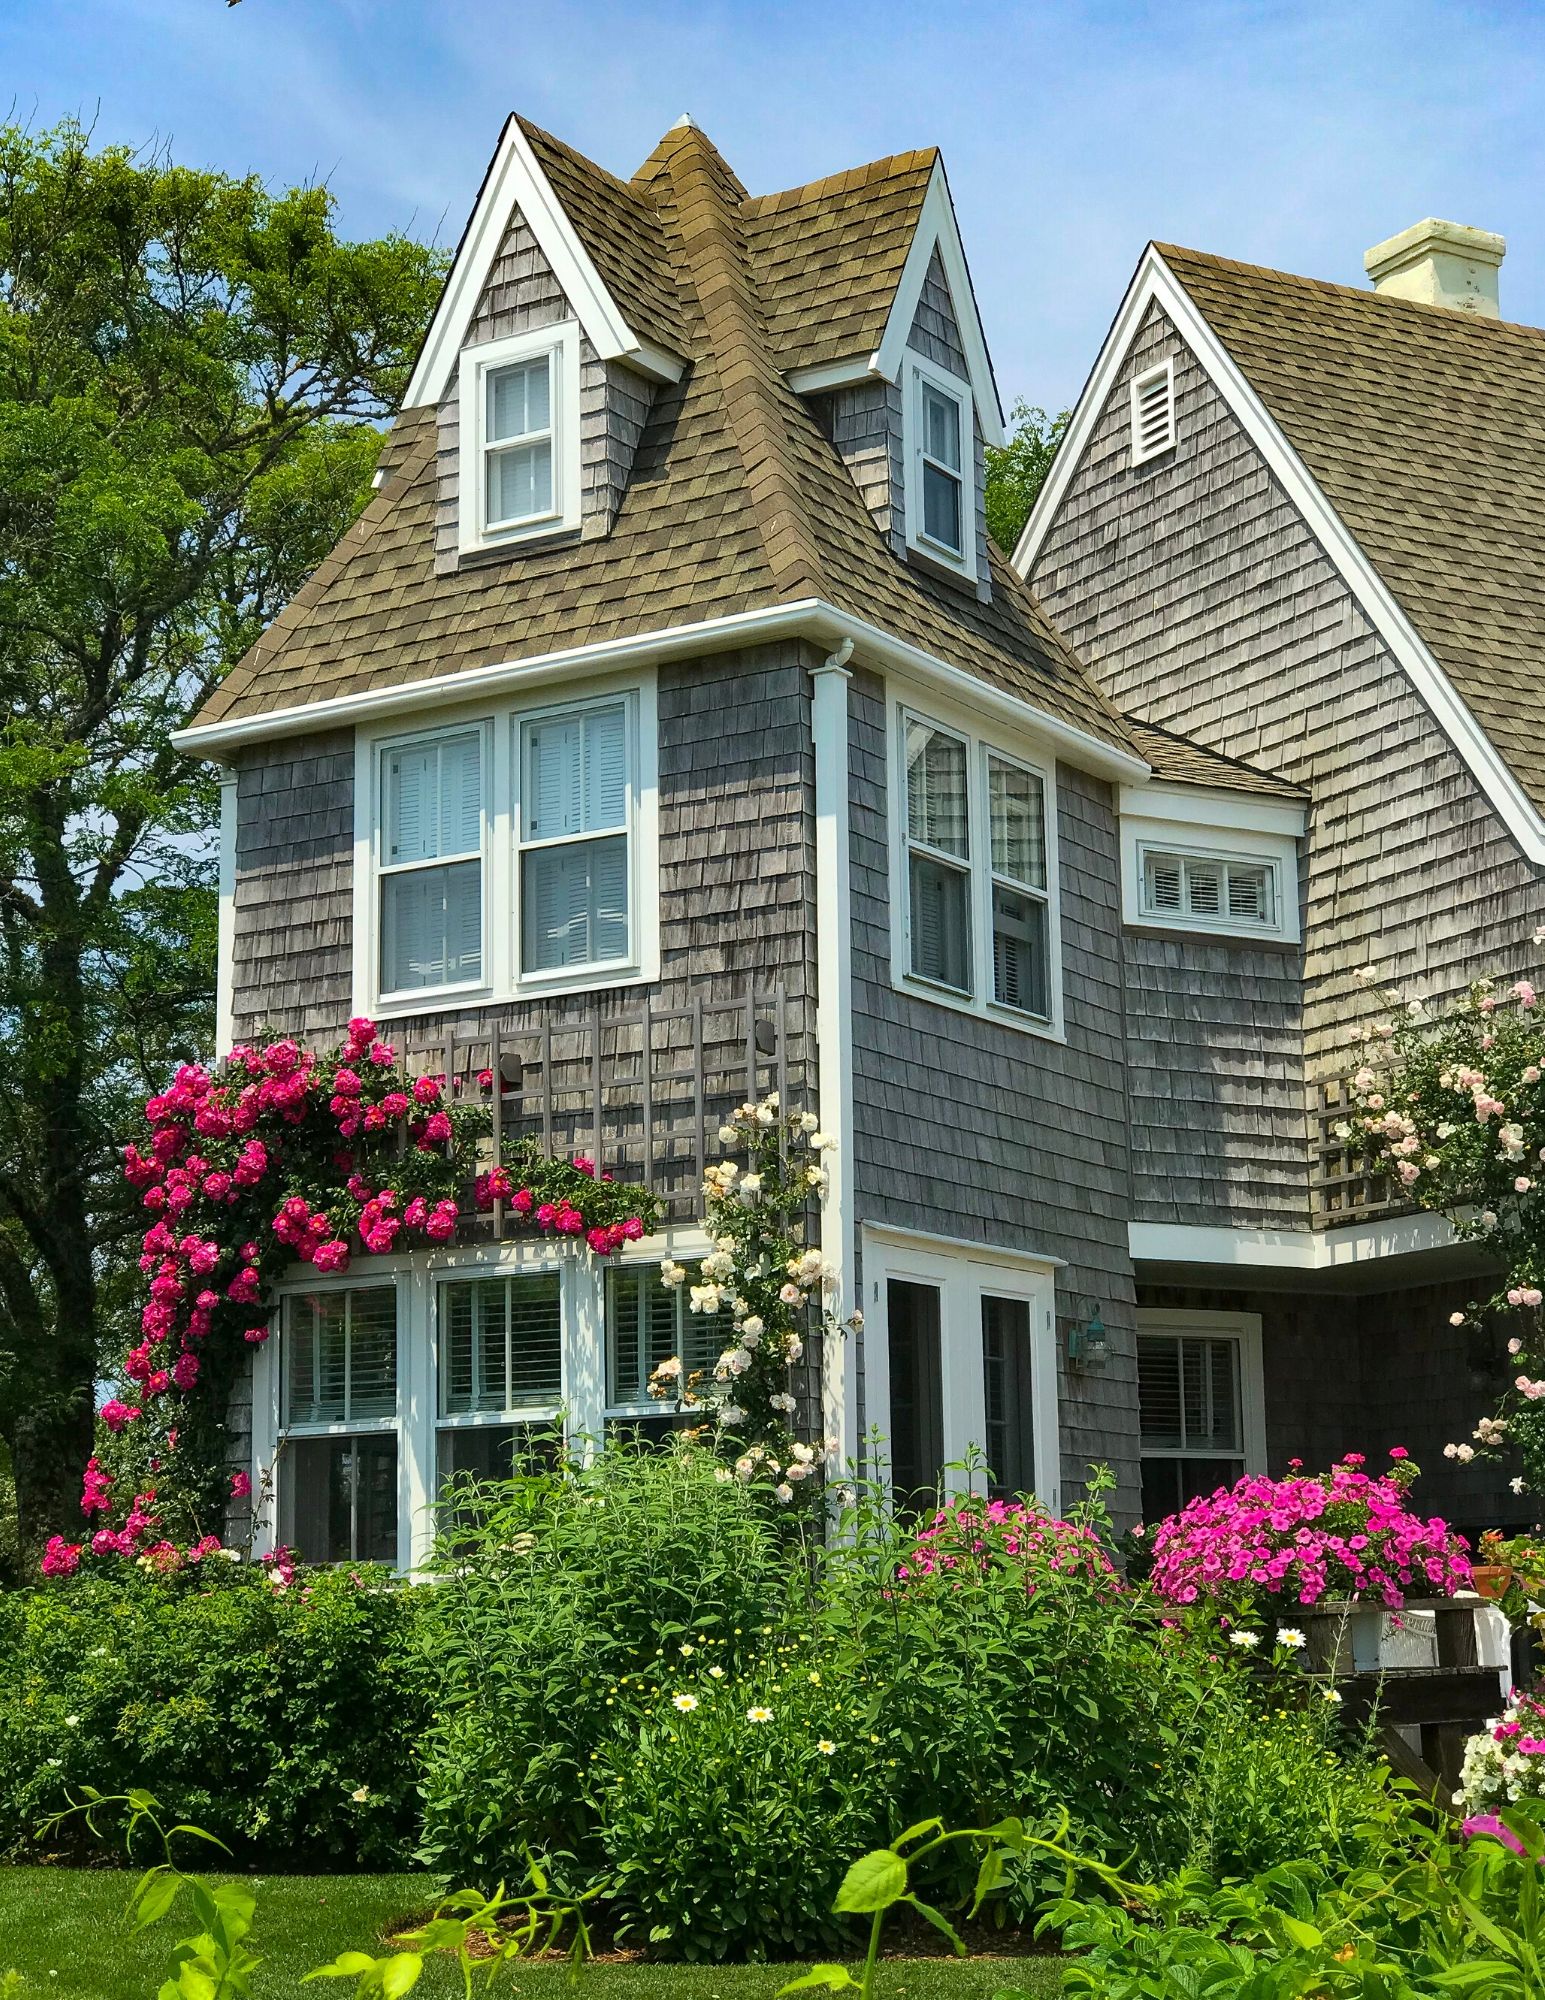 Nantucket Rose Covered Cottages in Sconset-9